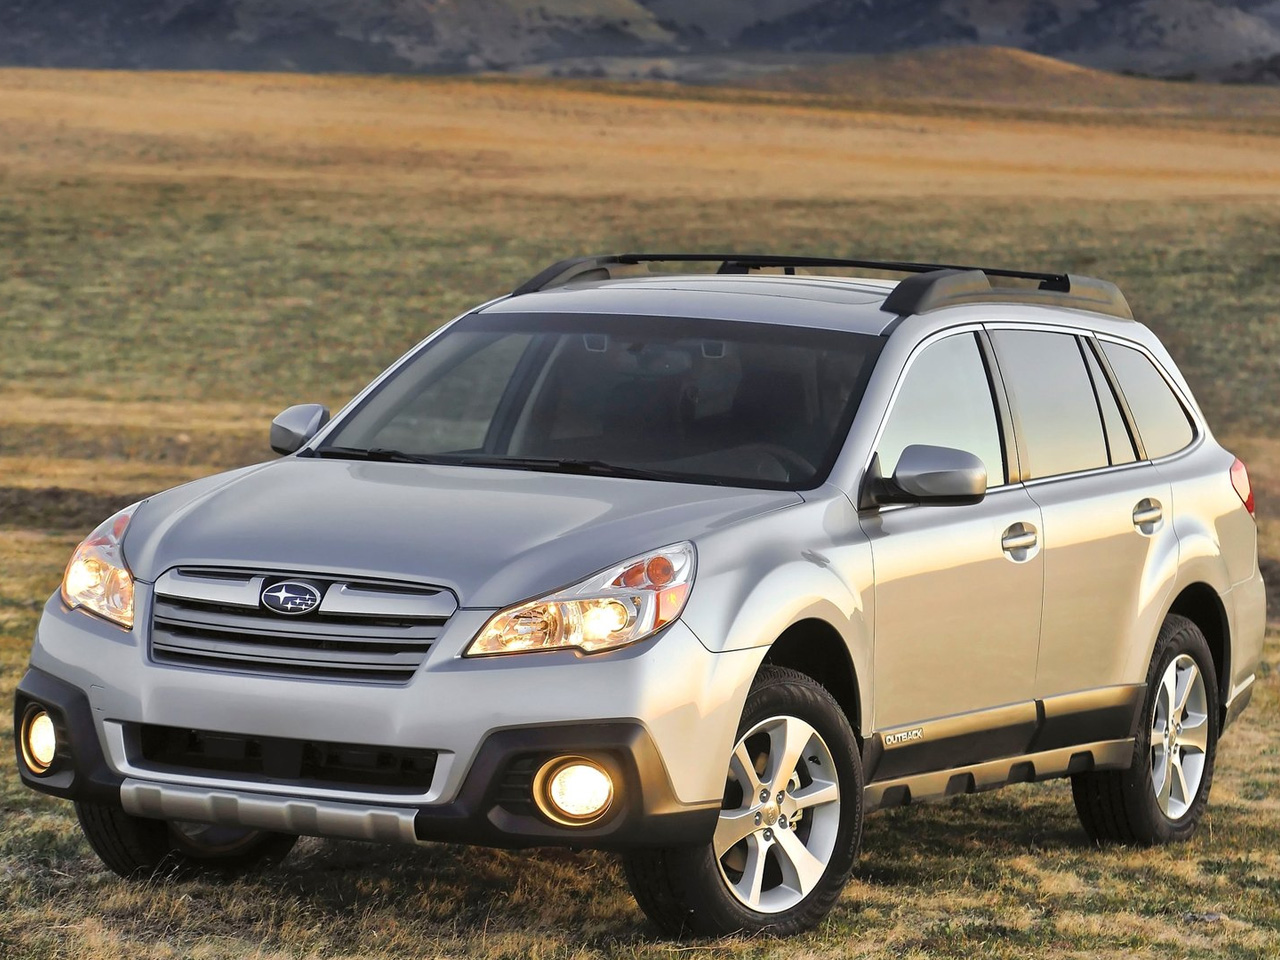 2013 Subaru Outback Review and Pictures Car Review